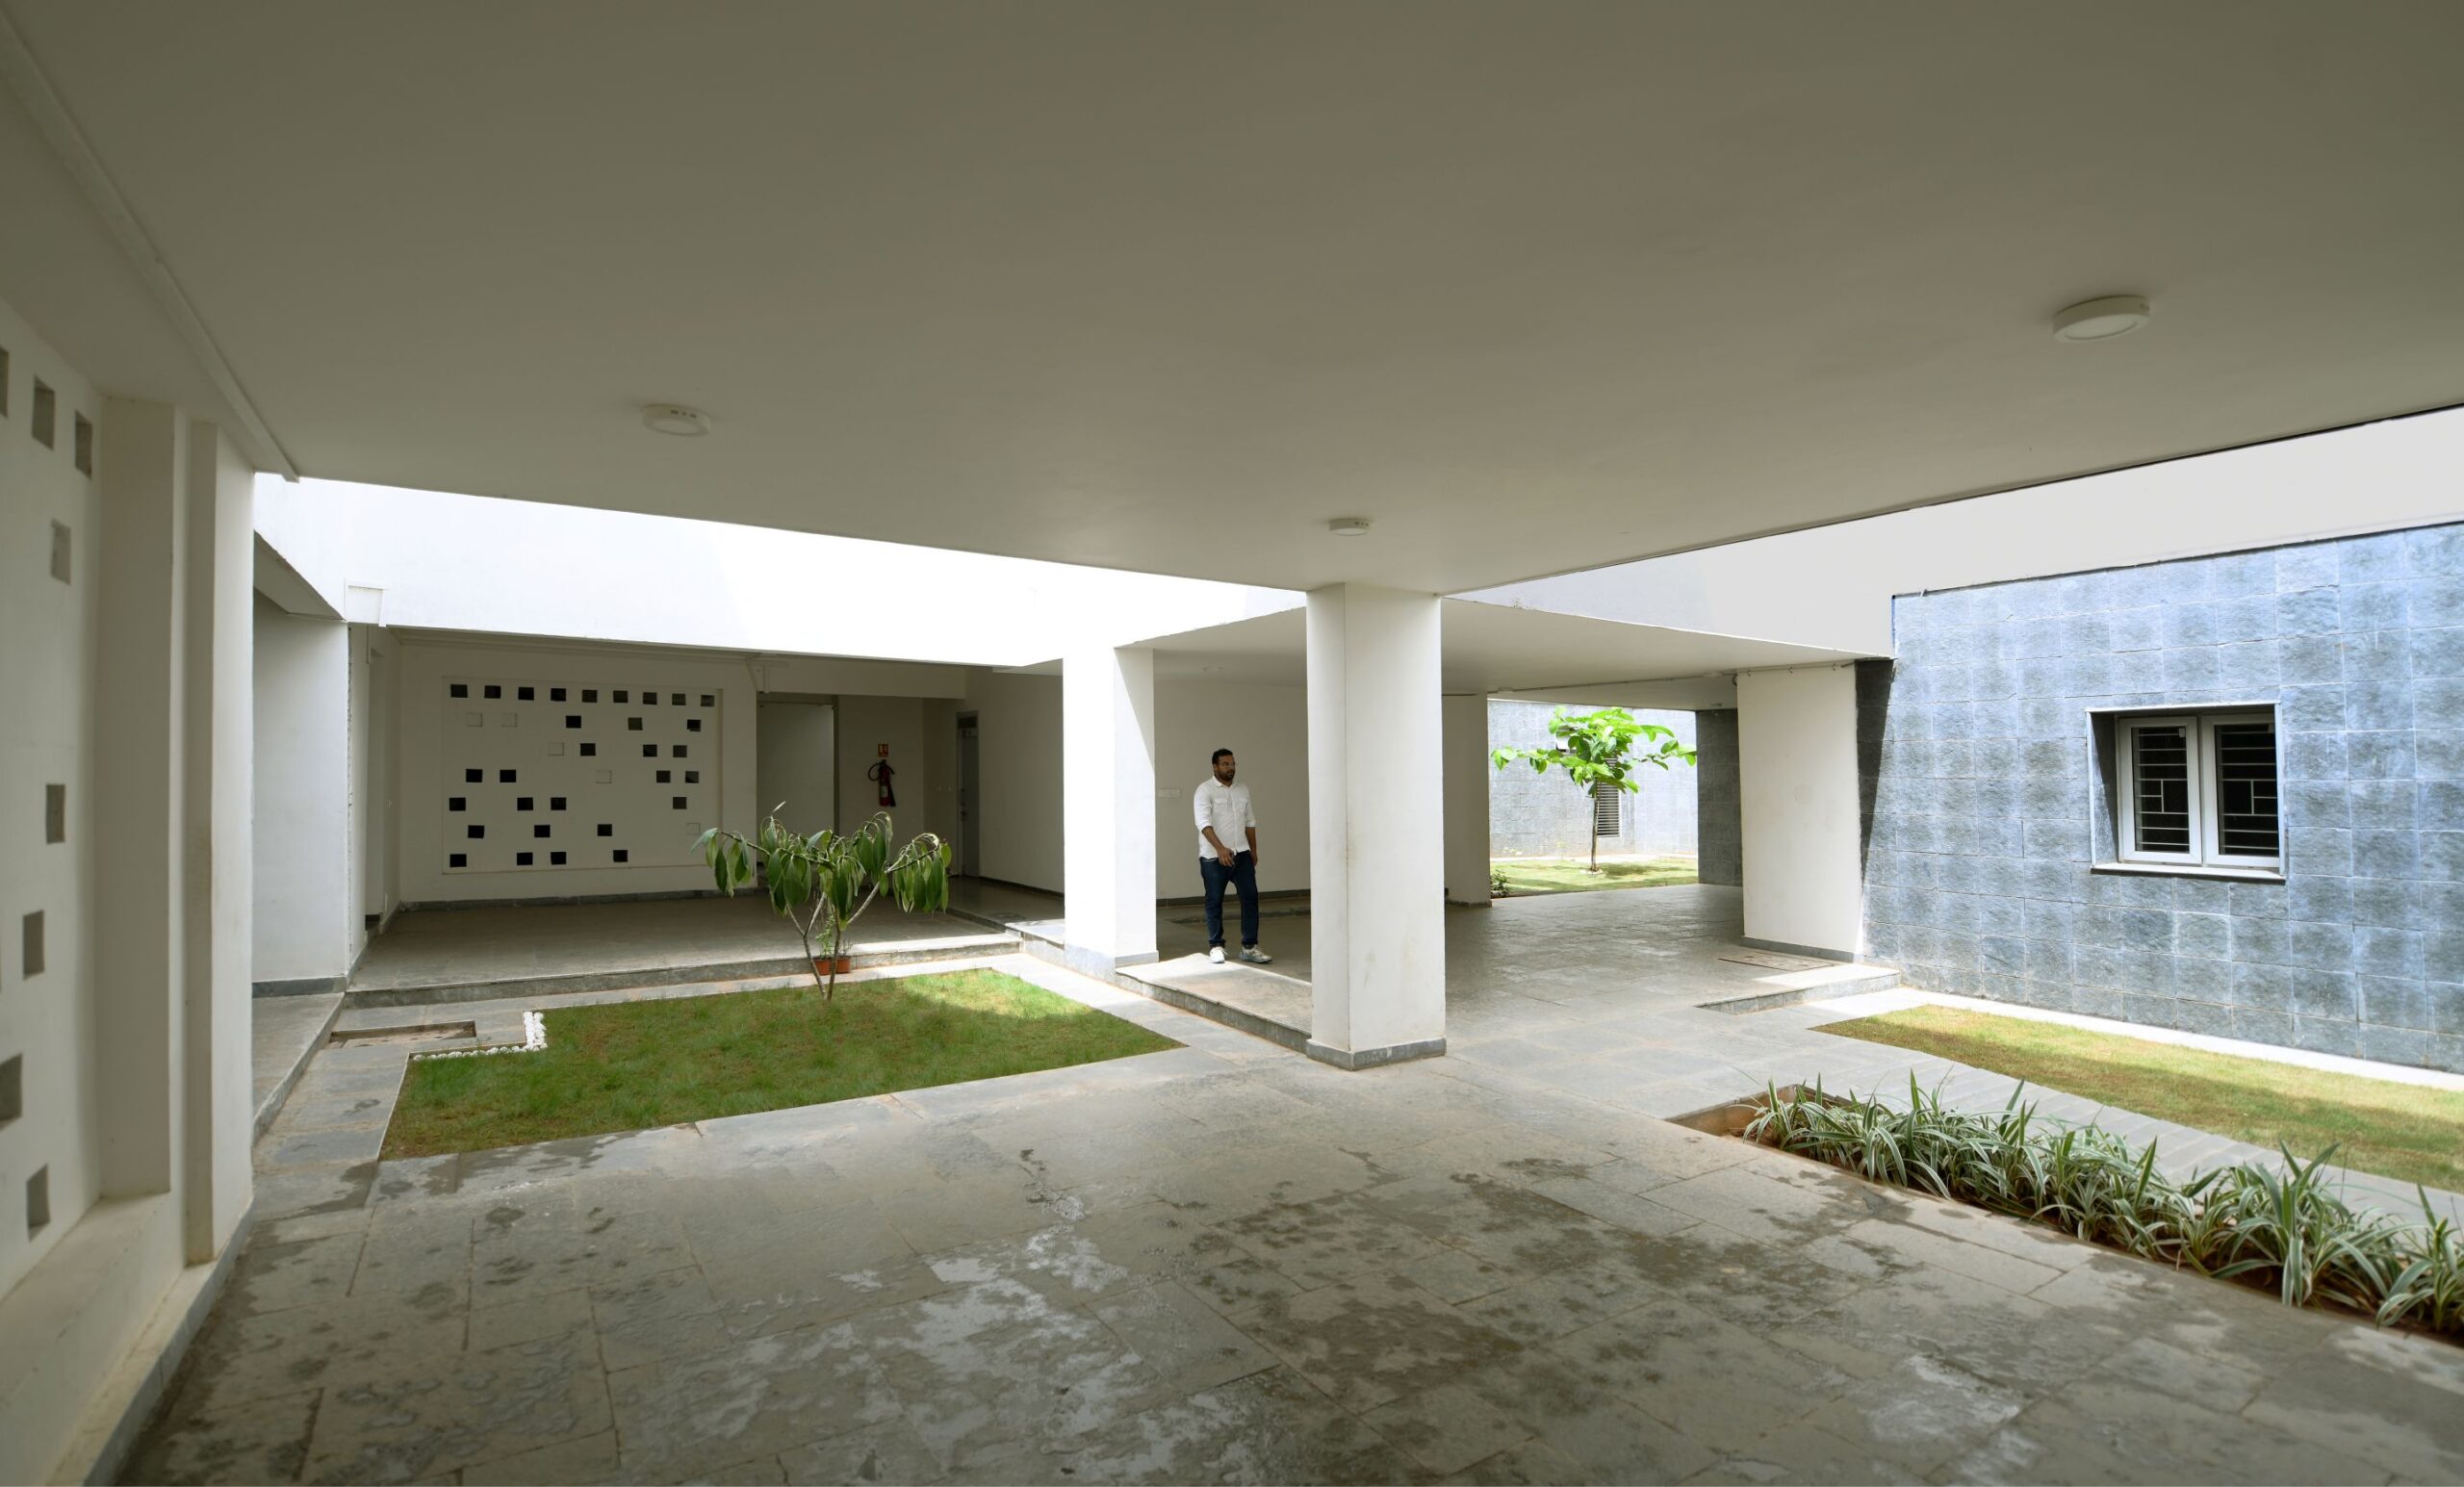 School of Planning And Architecture Student Housing, Vijayawada, by Mobile Offices 19